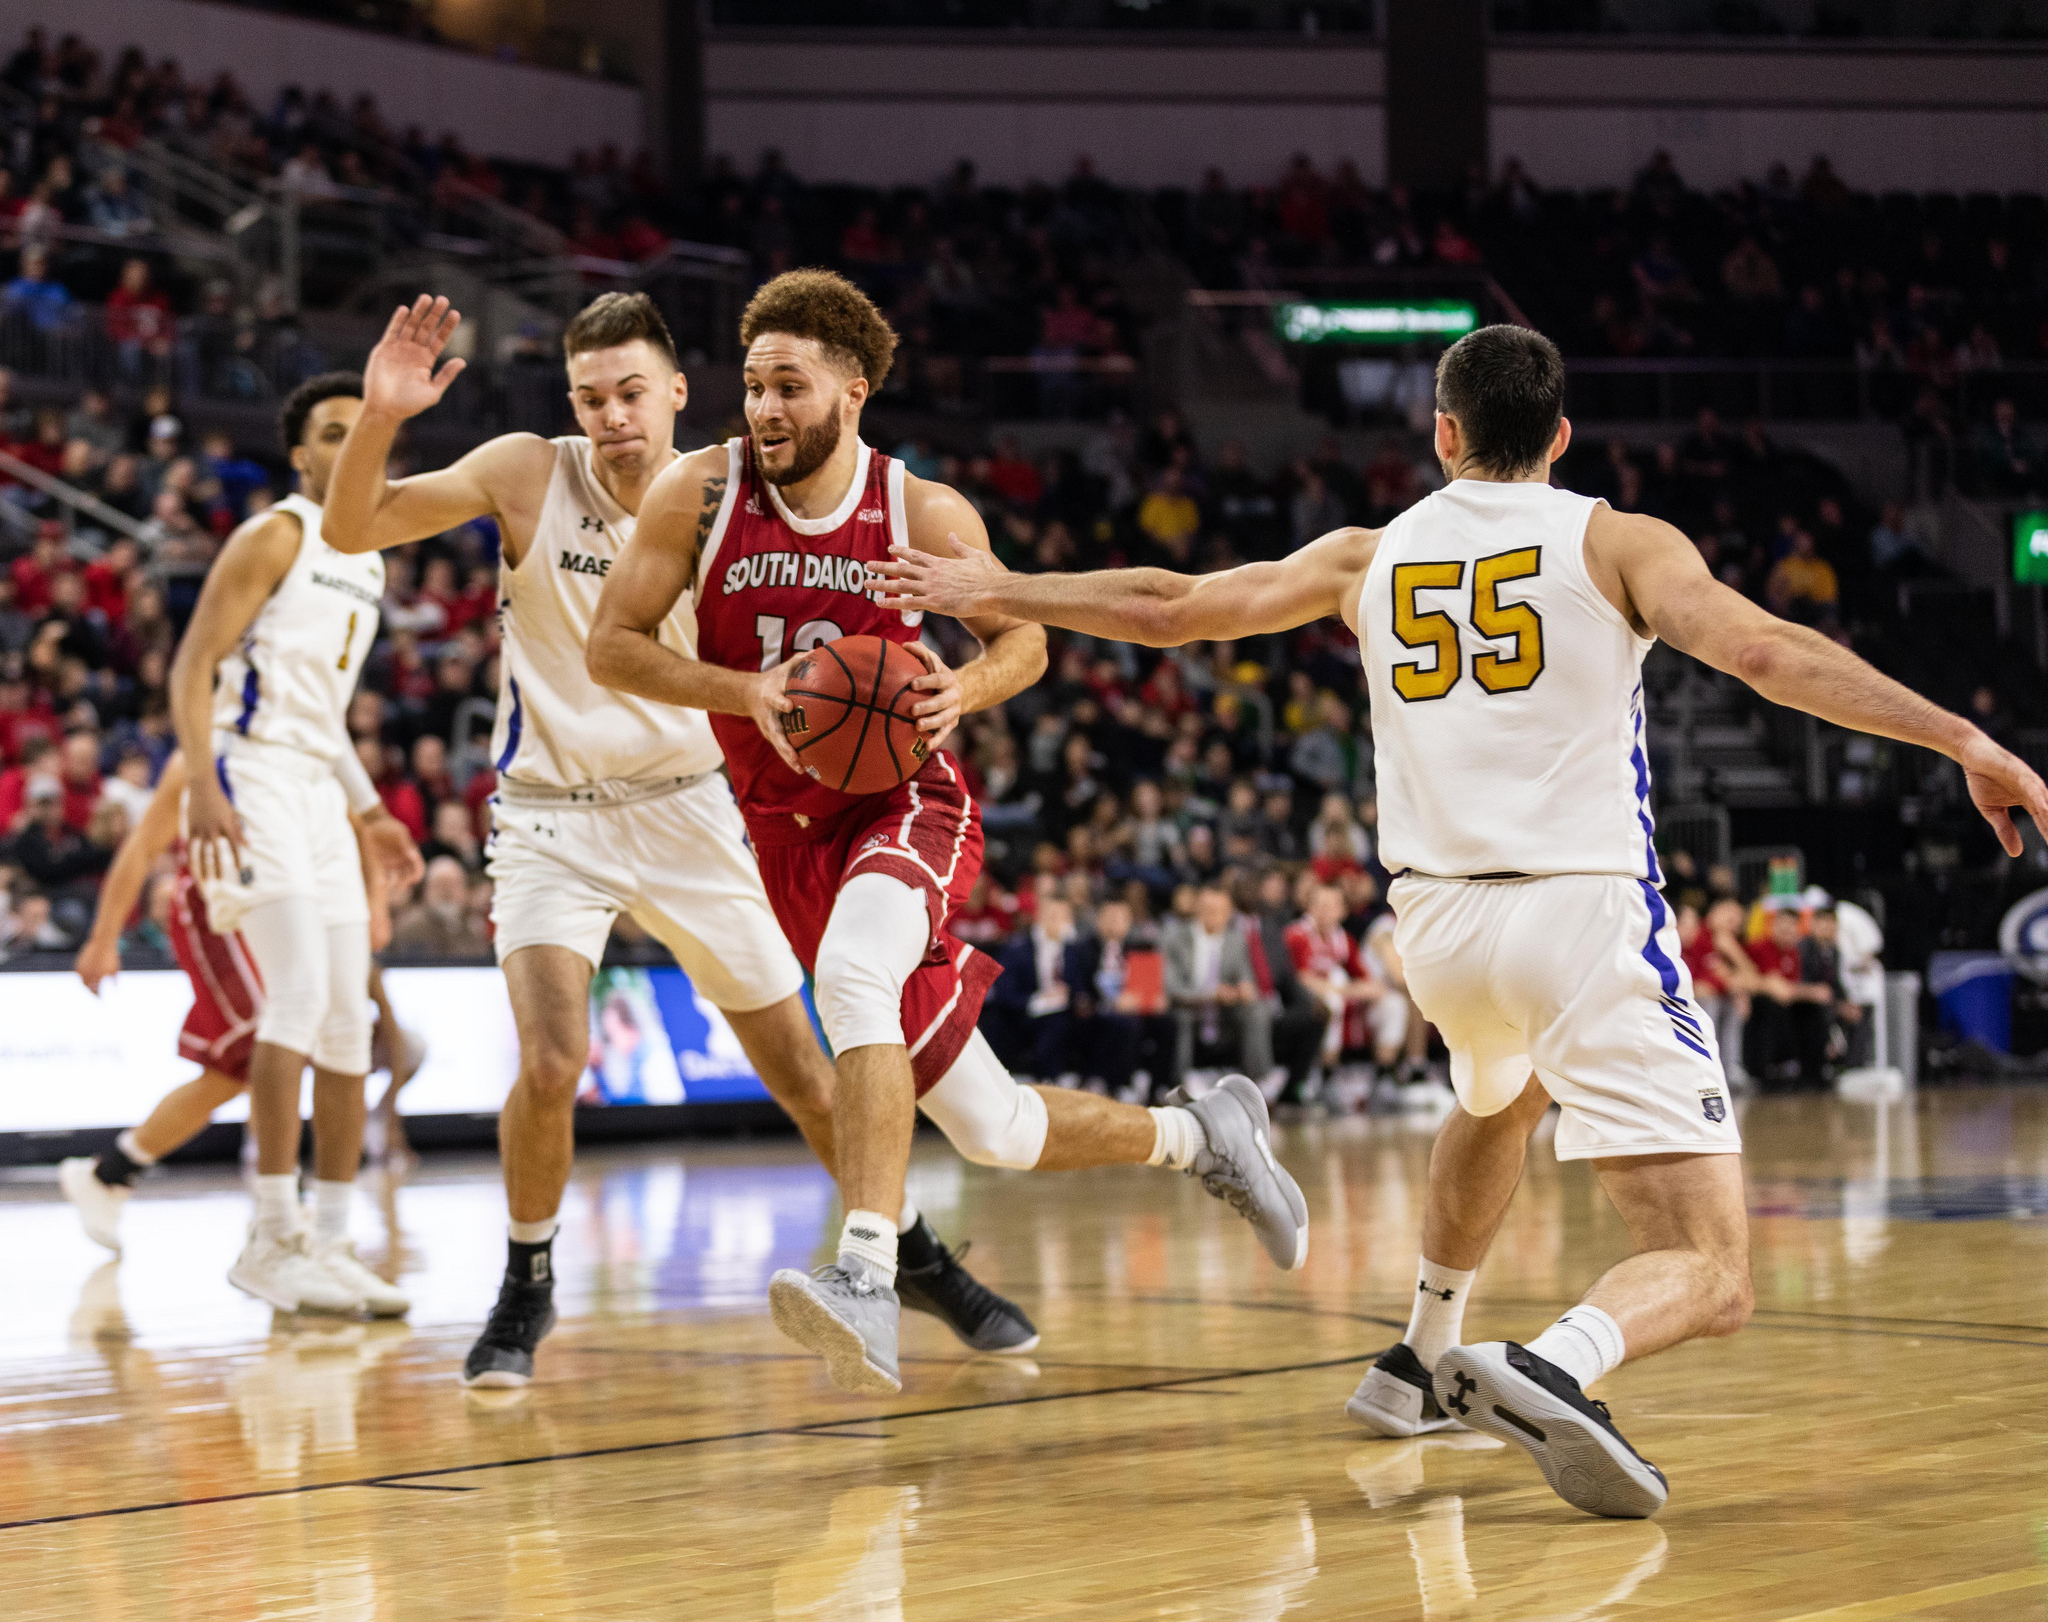 Coyotes stumble in quarterfinal, lose to Purdue-Fort Wayne 96-70